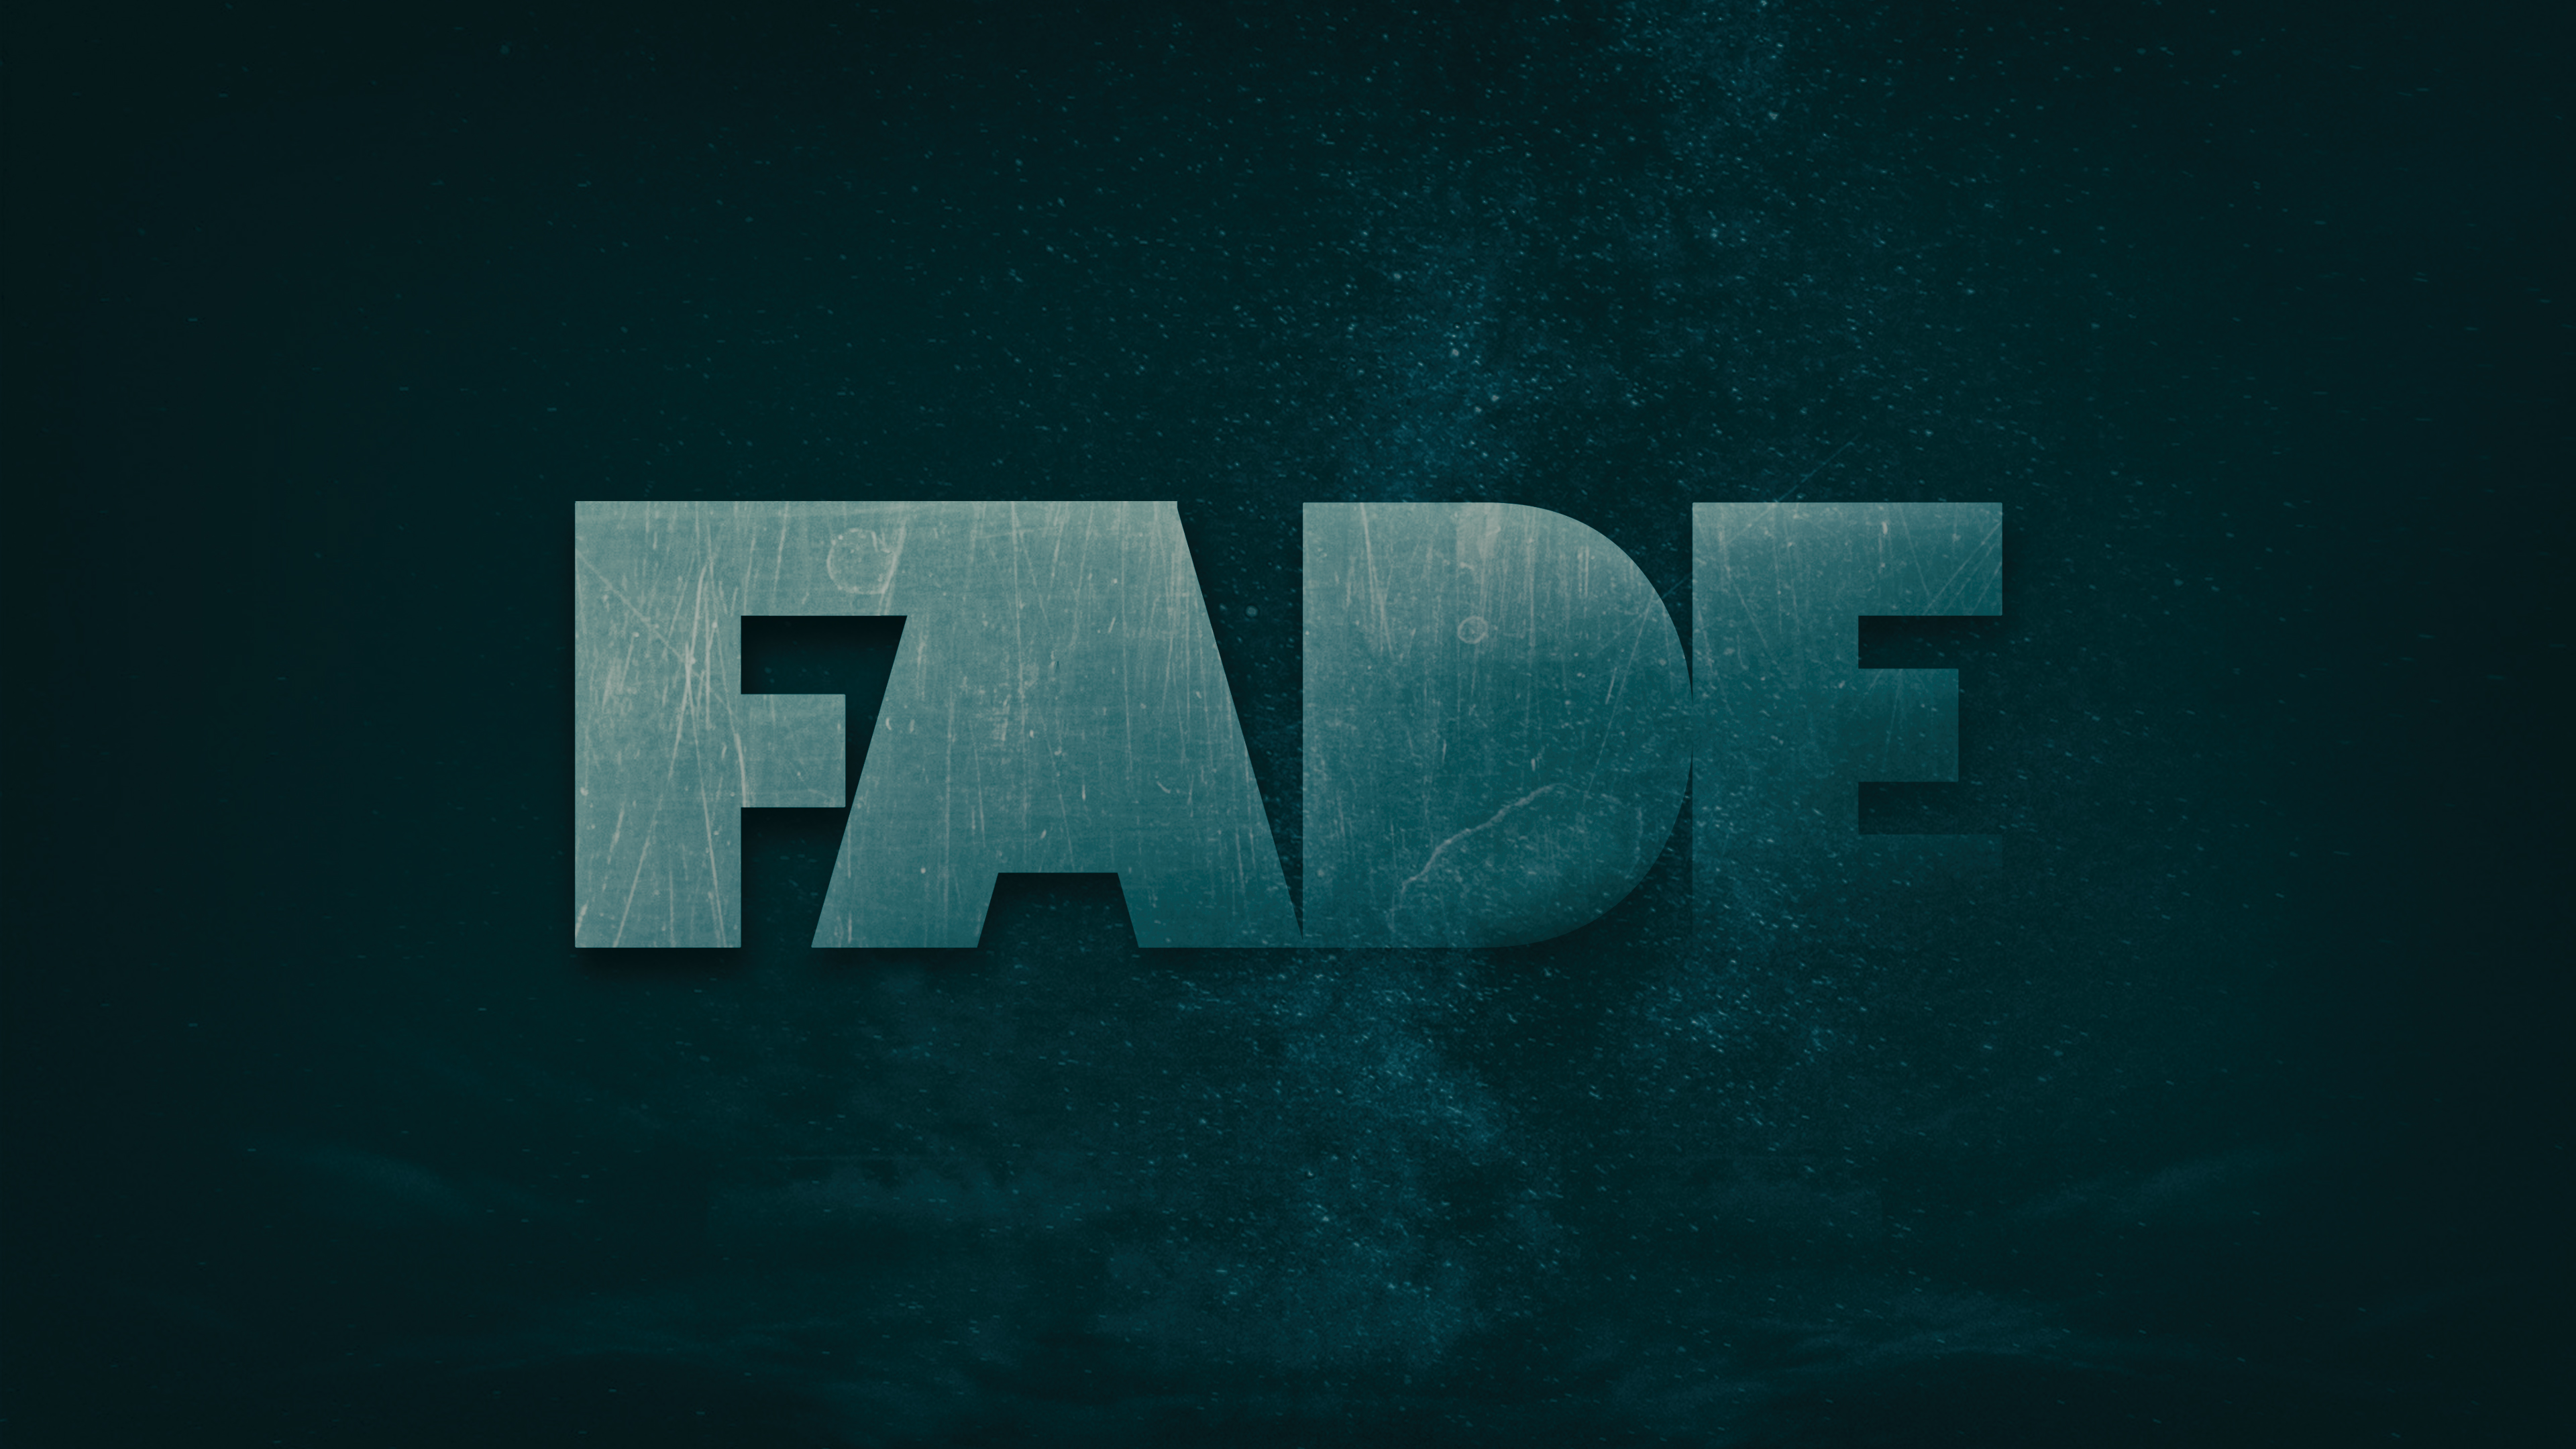 Fade but its for fortnite by shadowfade1716